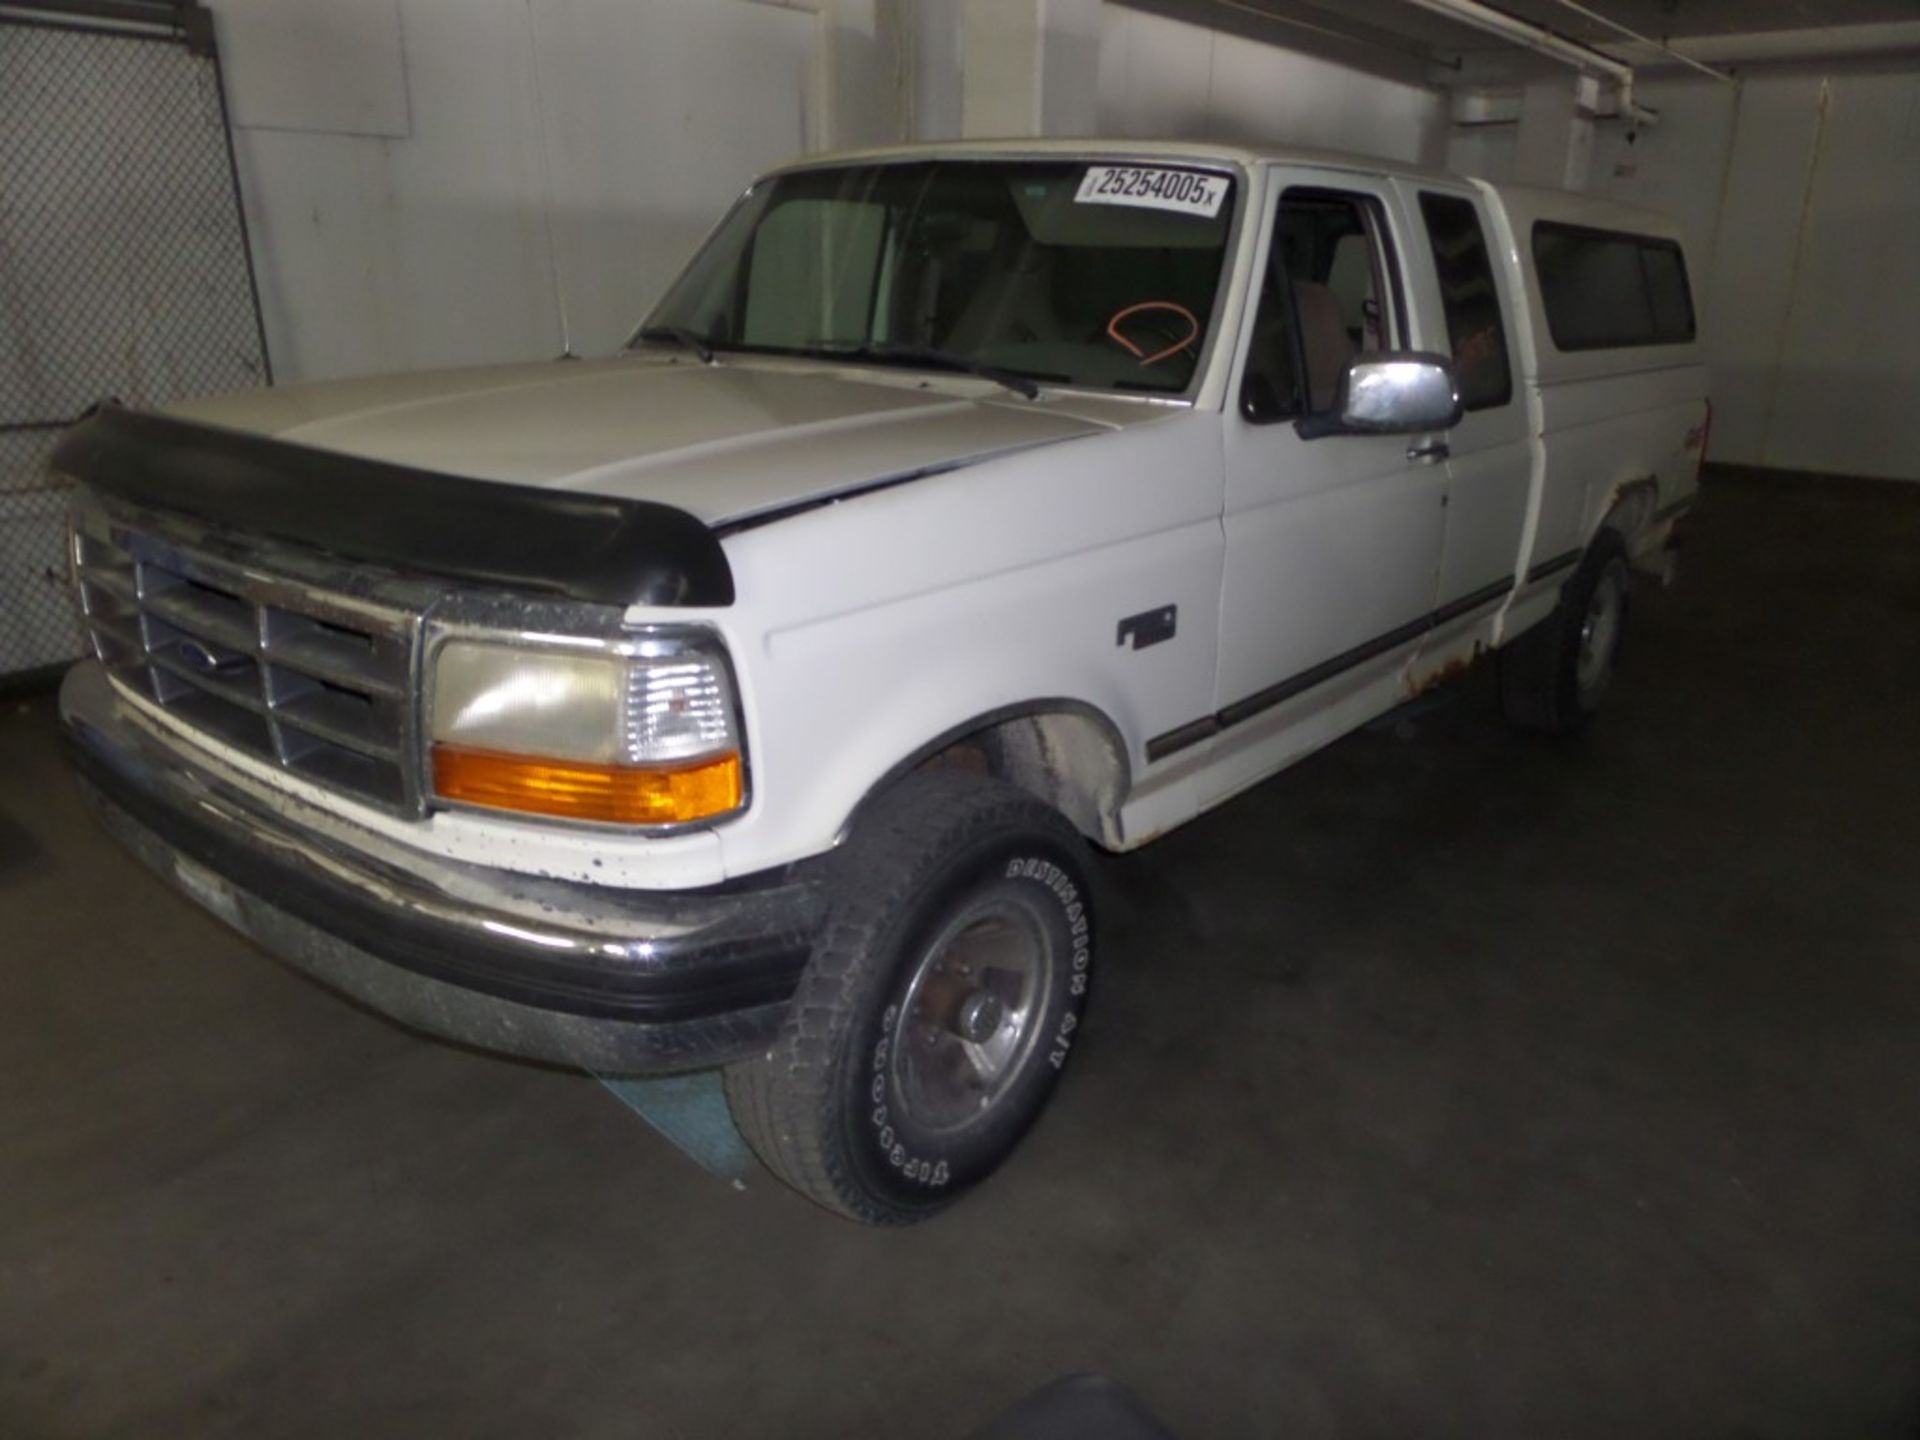 1995 Ford F150 4X4 Ext. Cab. Runs & Drives - IL Title 211,000 Miles - Image 8 of 9